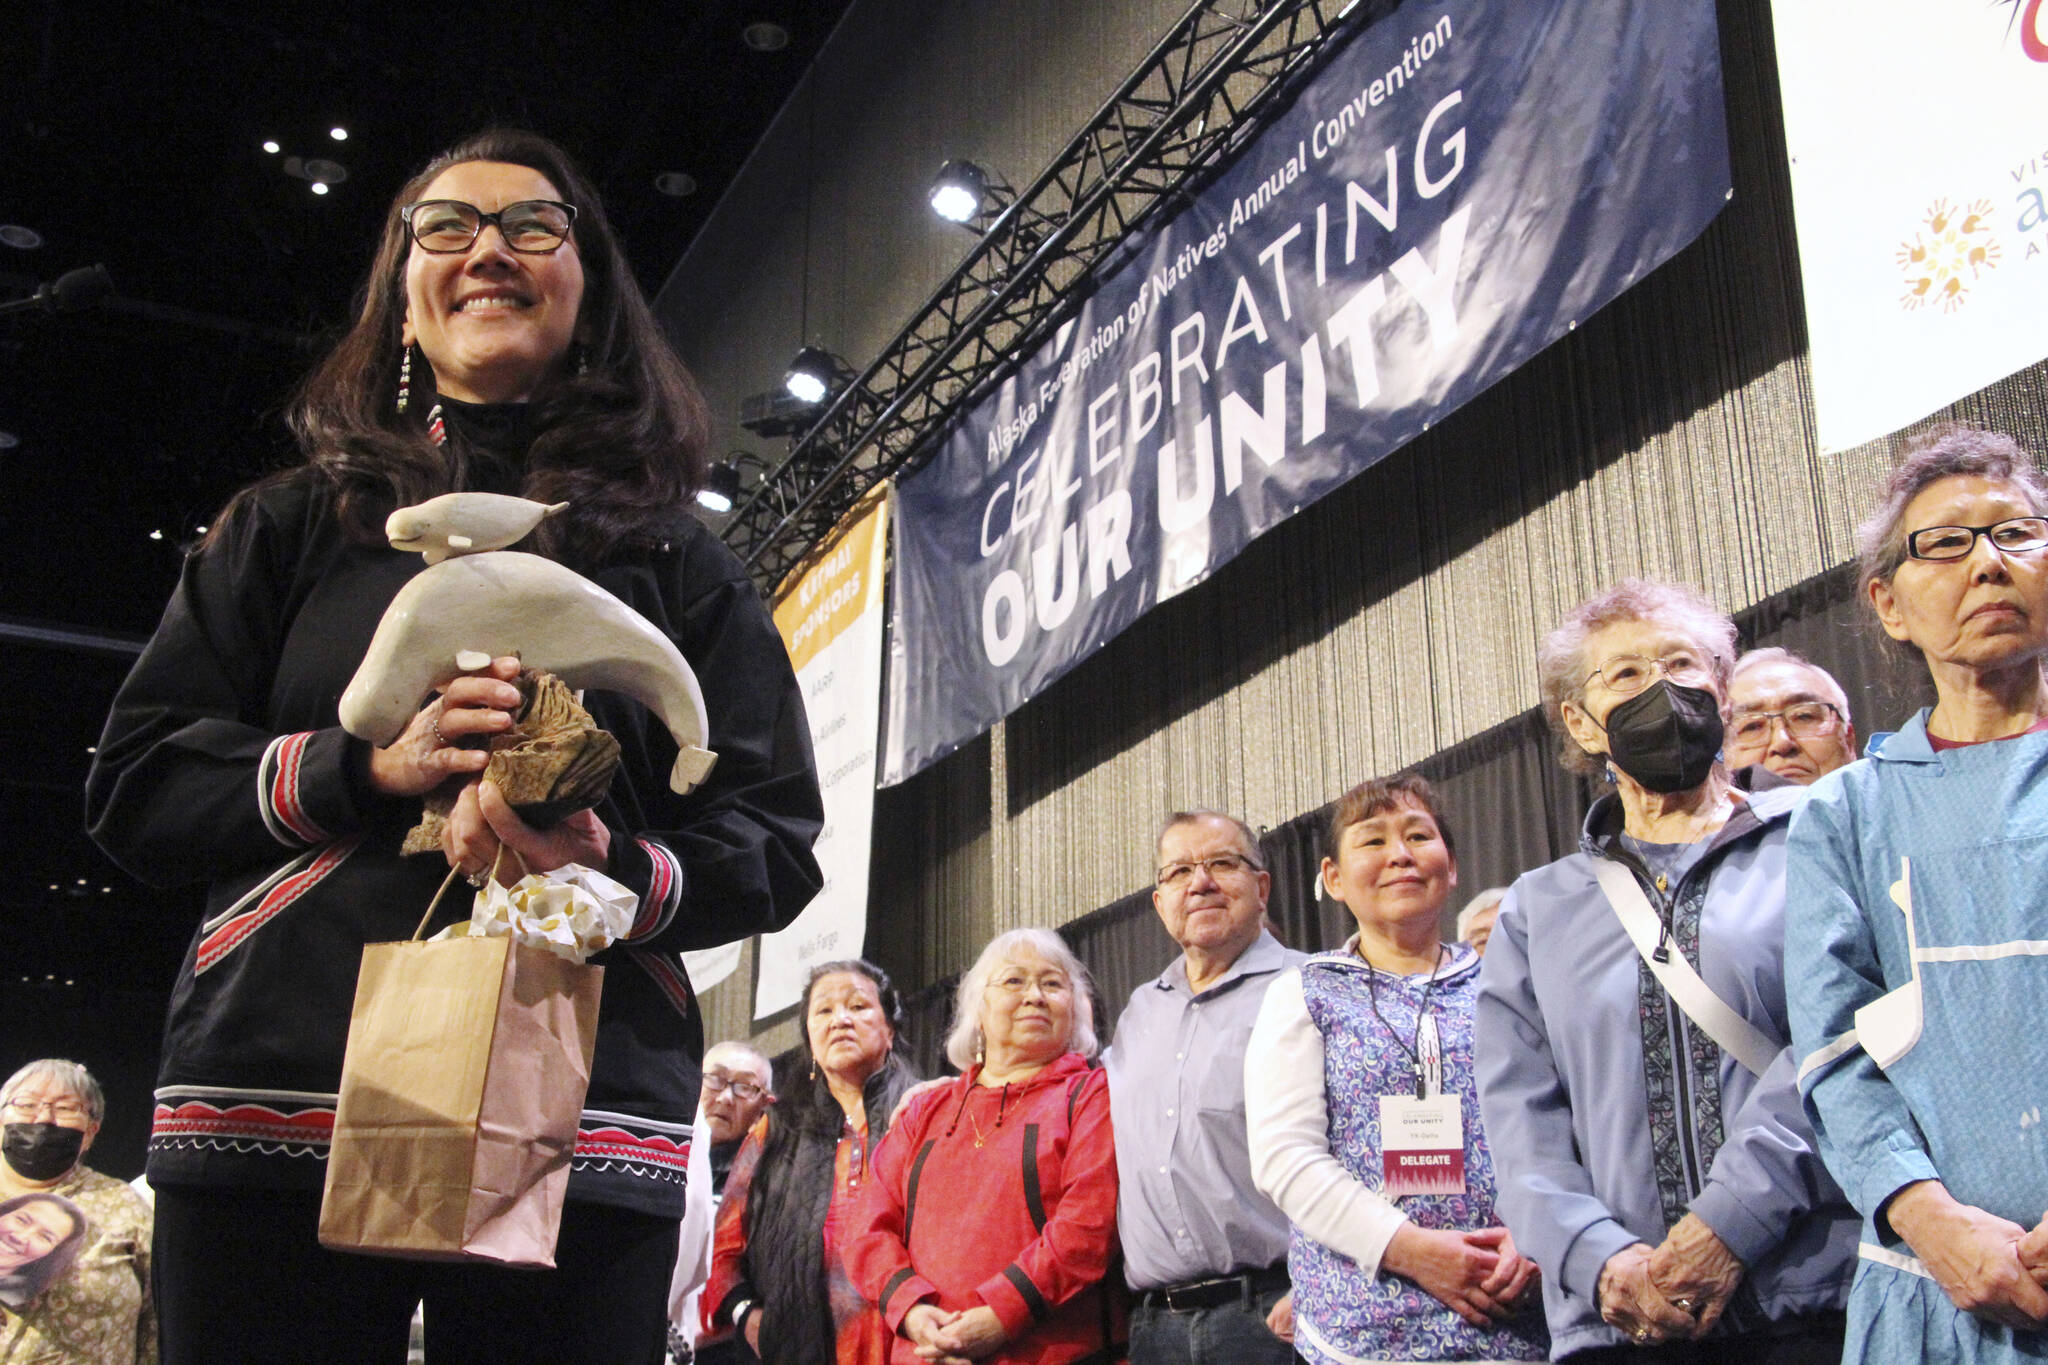 Rep. Mary Peltola, D-Alaska, acknowledges audience members singing a song of prayer for her at the Alaska Federation of Natives conference in Anchorage on Oct. 20, 2022. (AP Photo/Mark Thiessen, File)